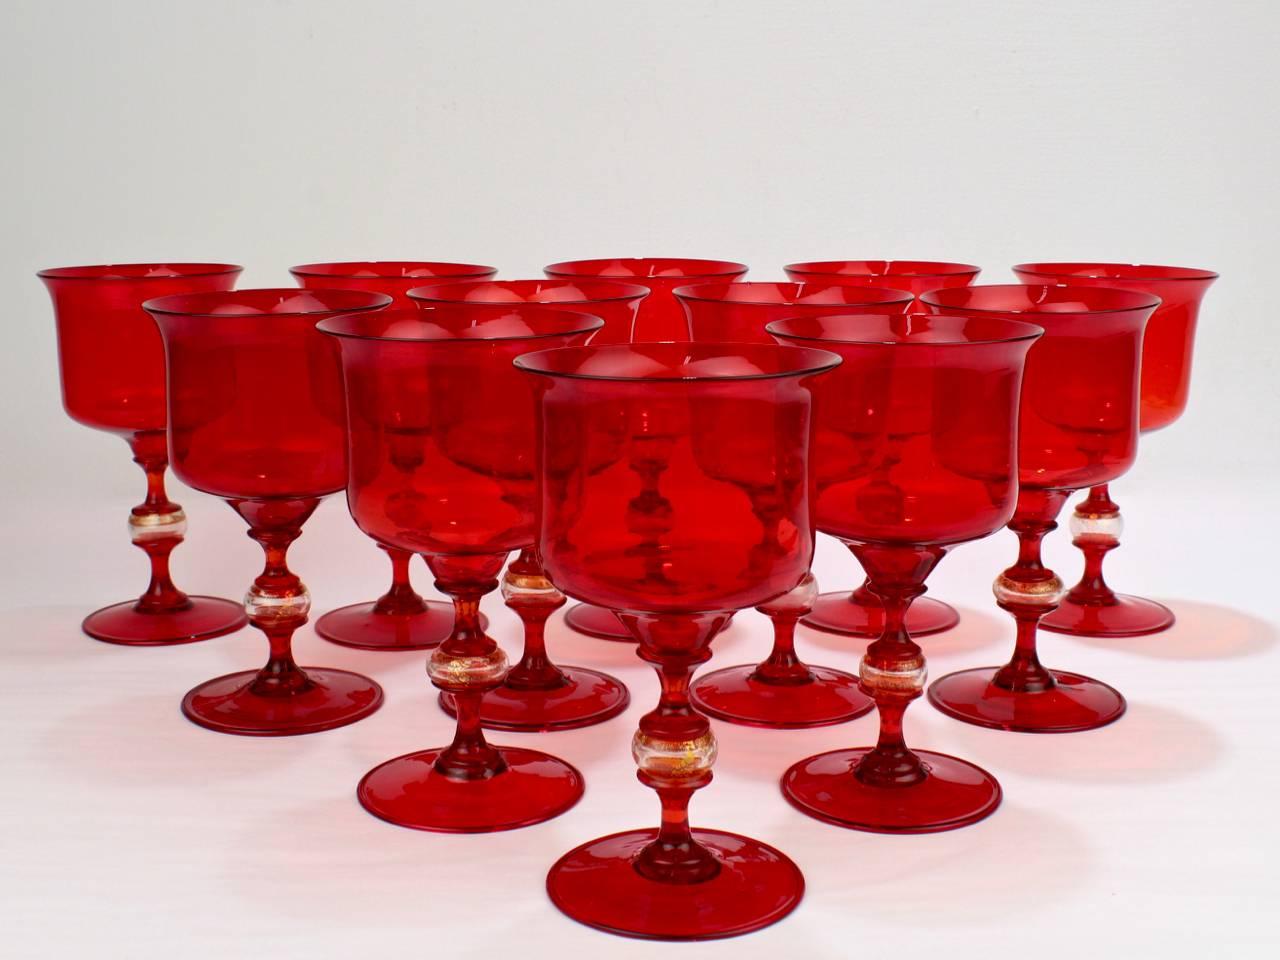 A complete set of 12 red Venetian glass wine goblets.

The wine glasses have cups supported by pedestals the central spheres with gold fleck decoration and disk feet with a folded edge.

Height: ca. 6 1/2 in.

Items purchased from David